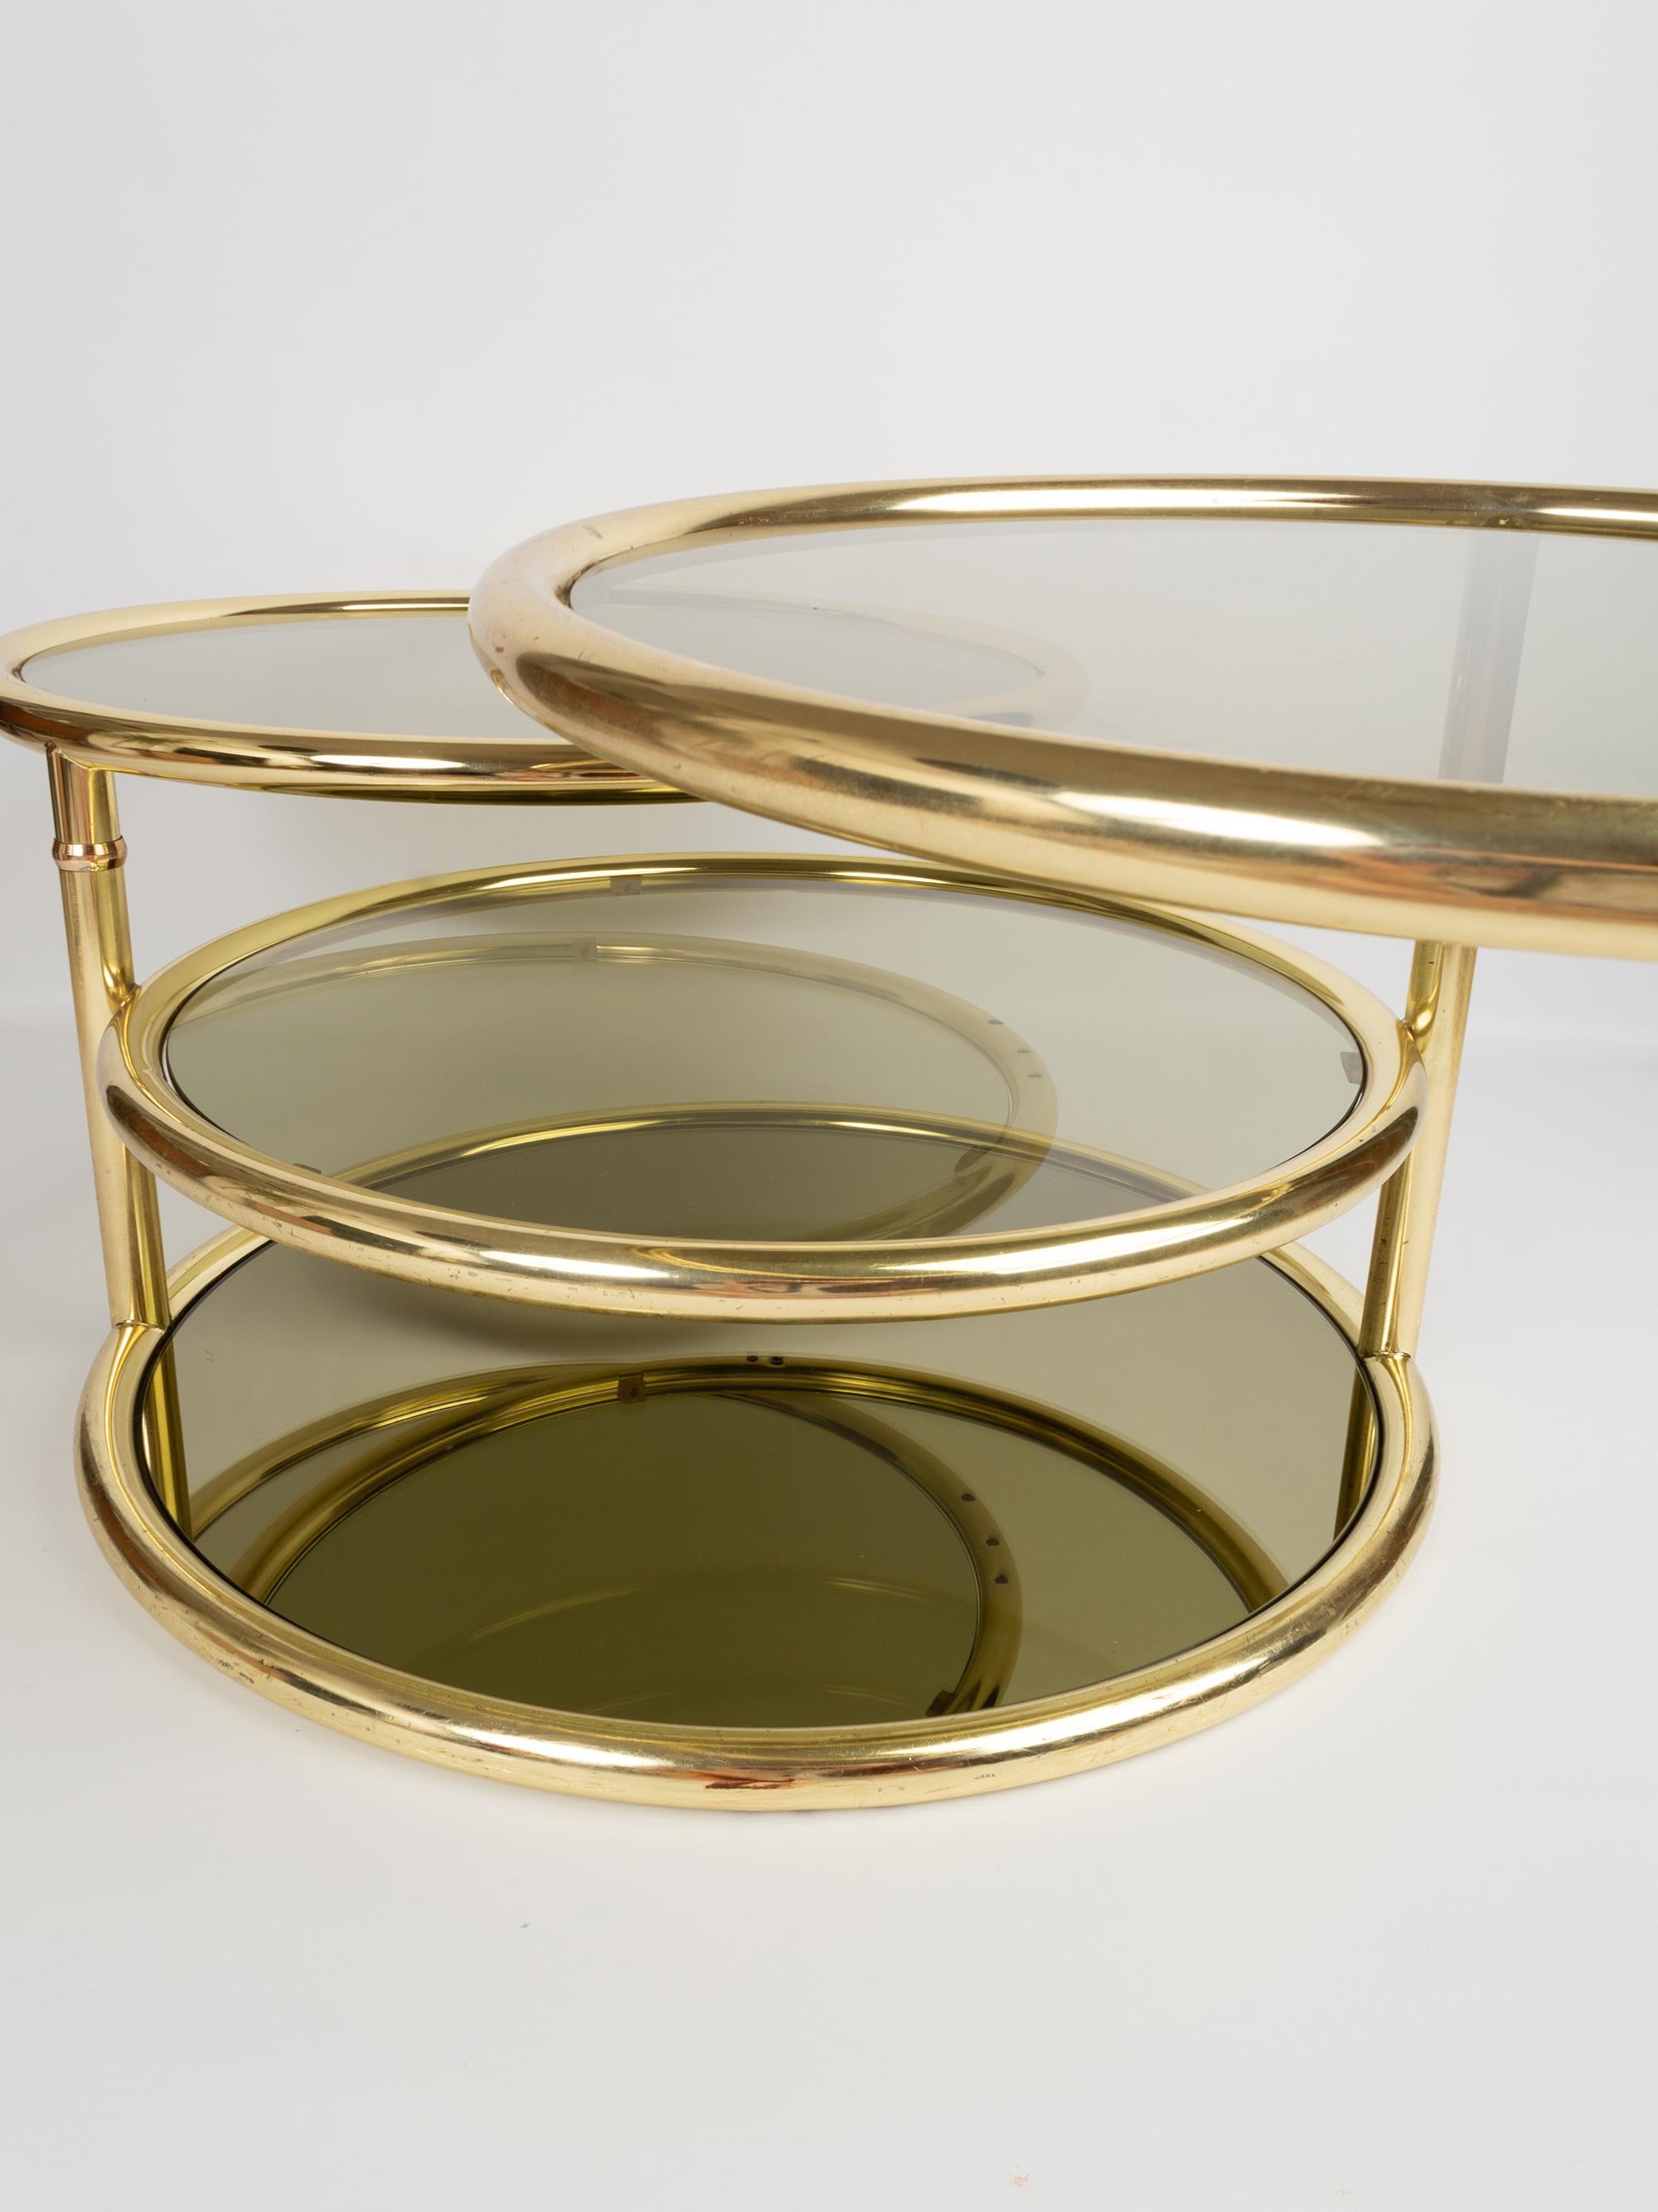 Late 20th Century Midcentury Circular Brass Swivel Tiered Coffee Cocktail Table, attributed to DIA For Sale